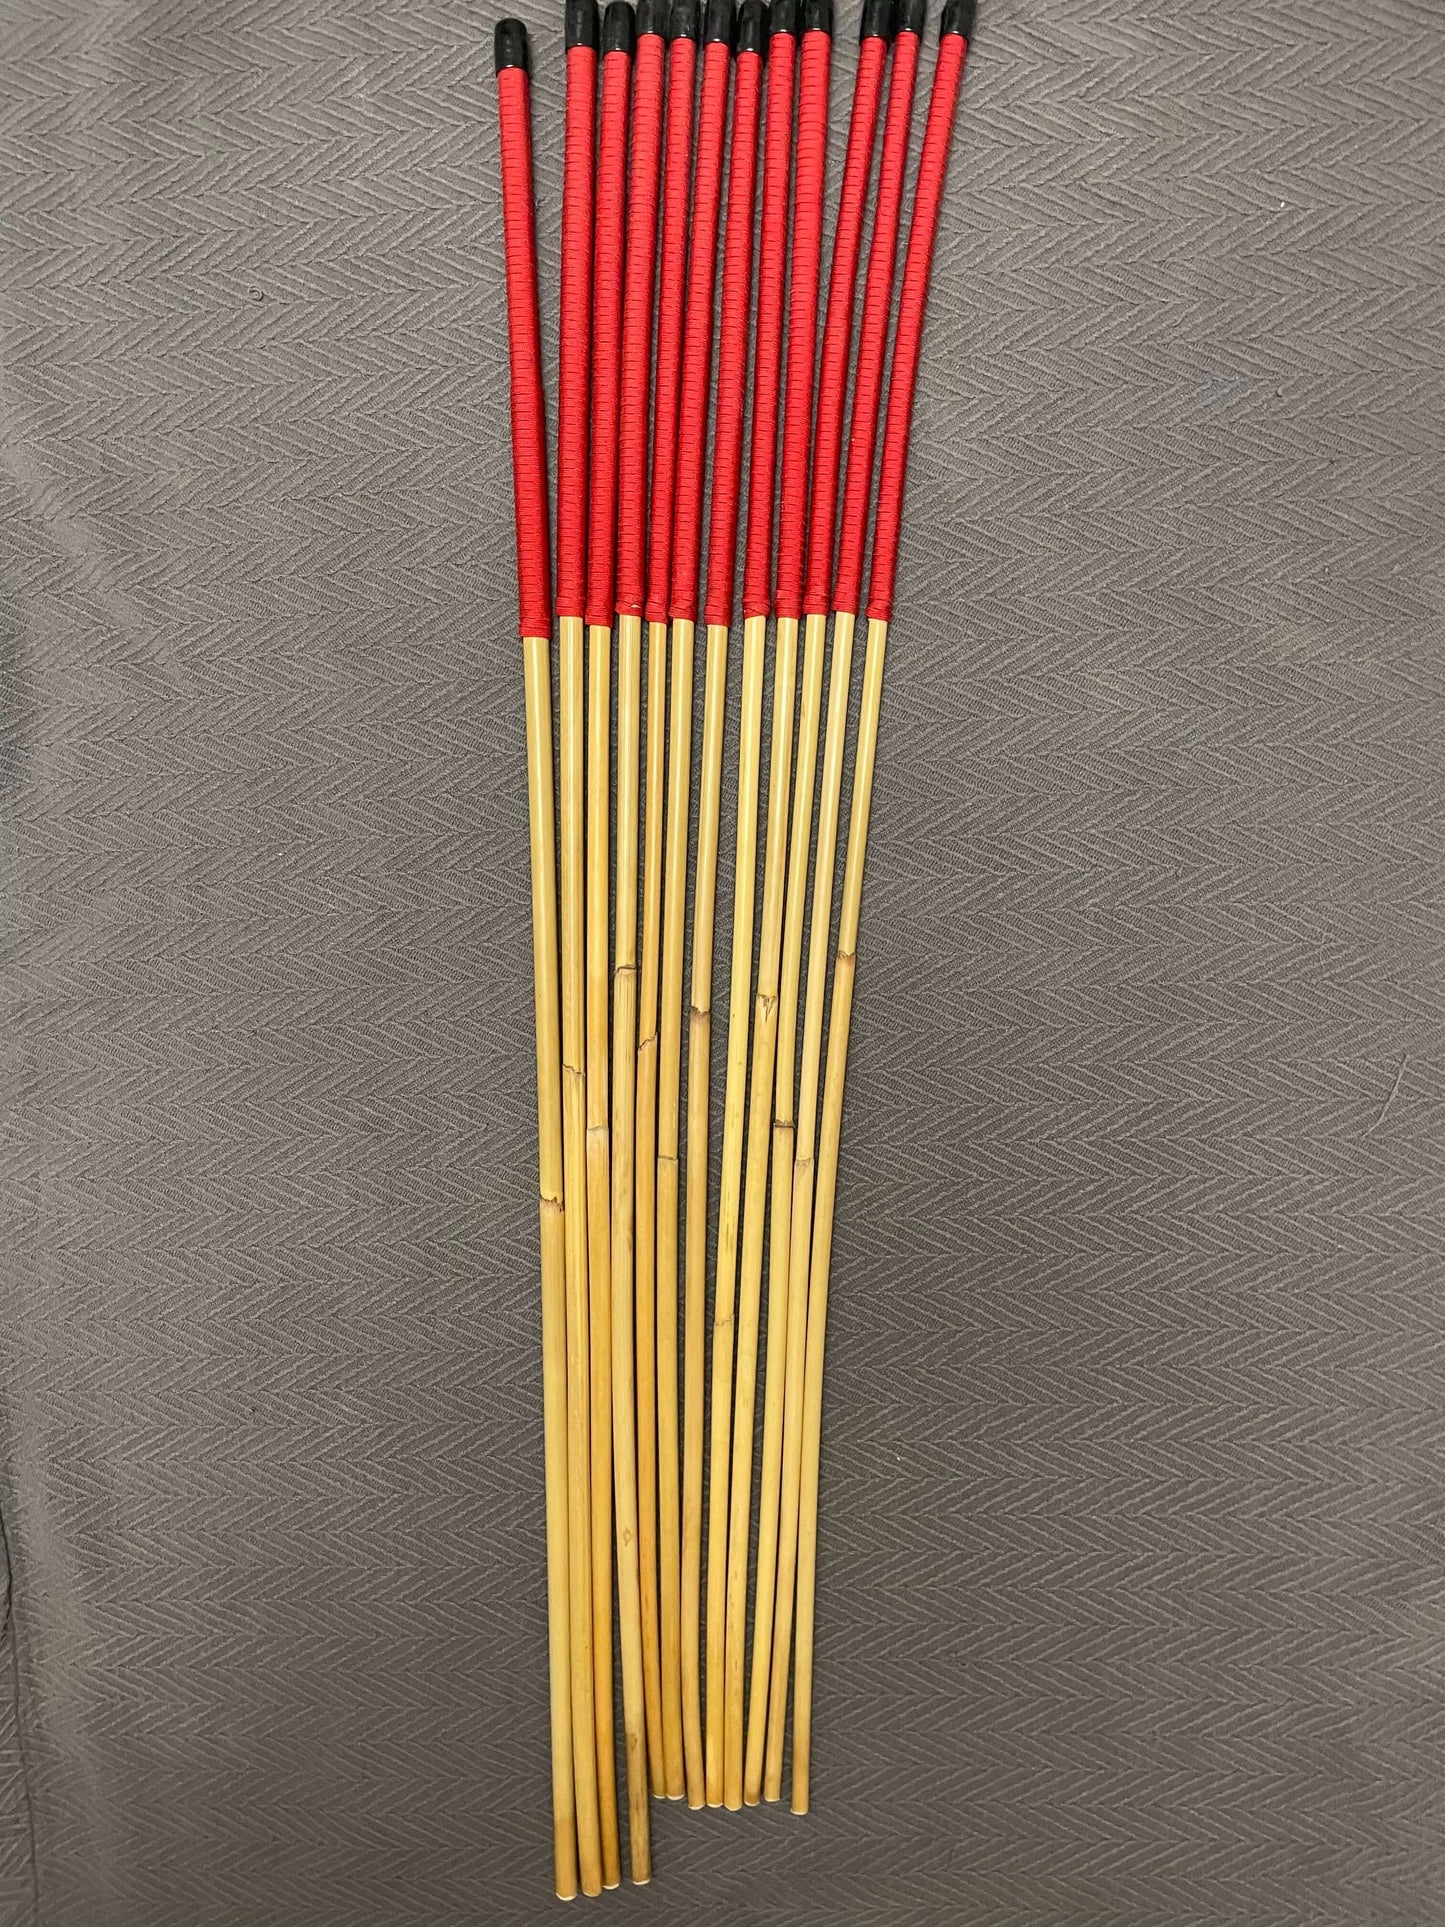 Set of 12 Dragon Rattan Canes / Punishment Canes wirh Red Paracord Handles